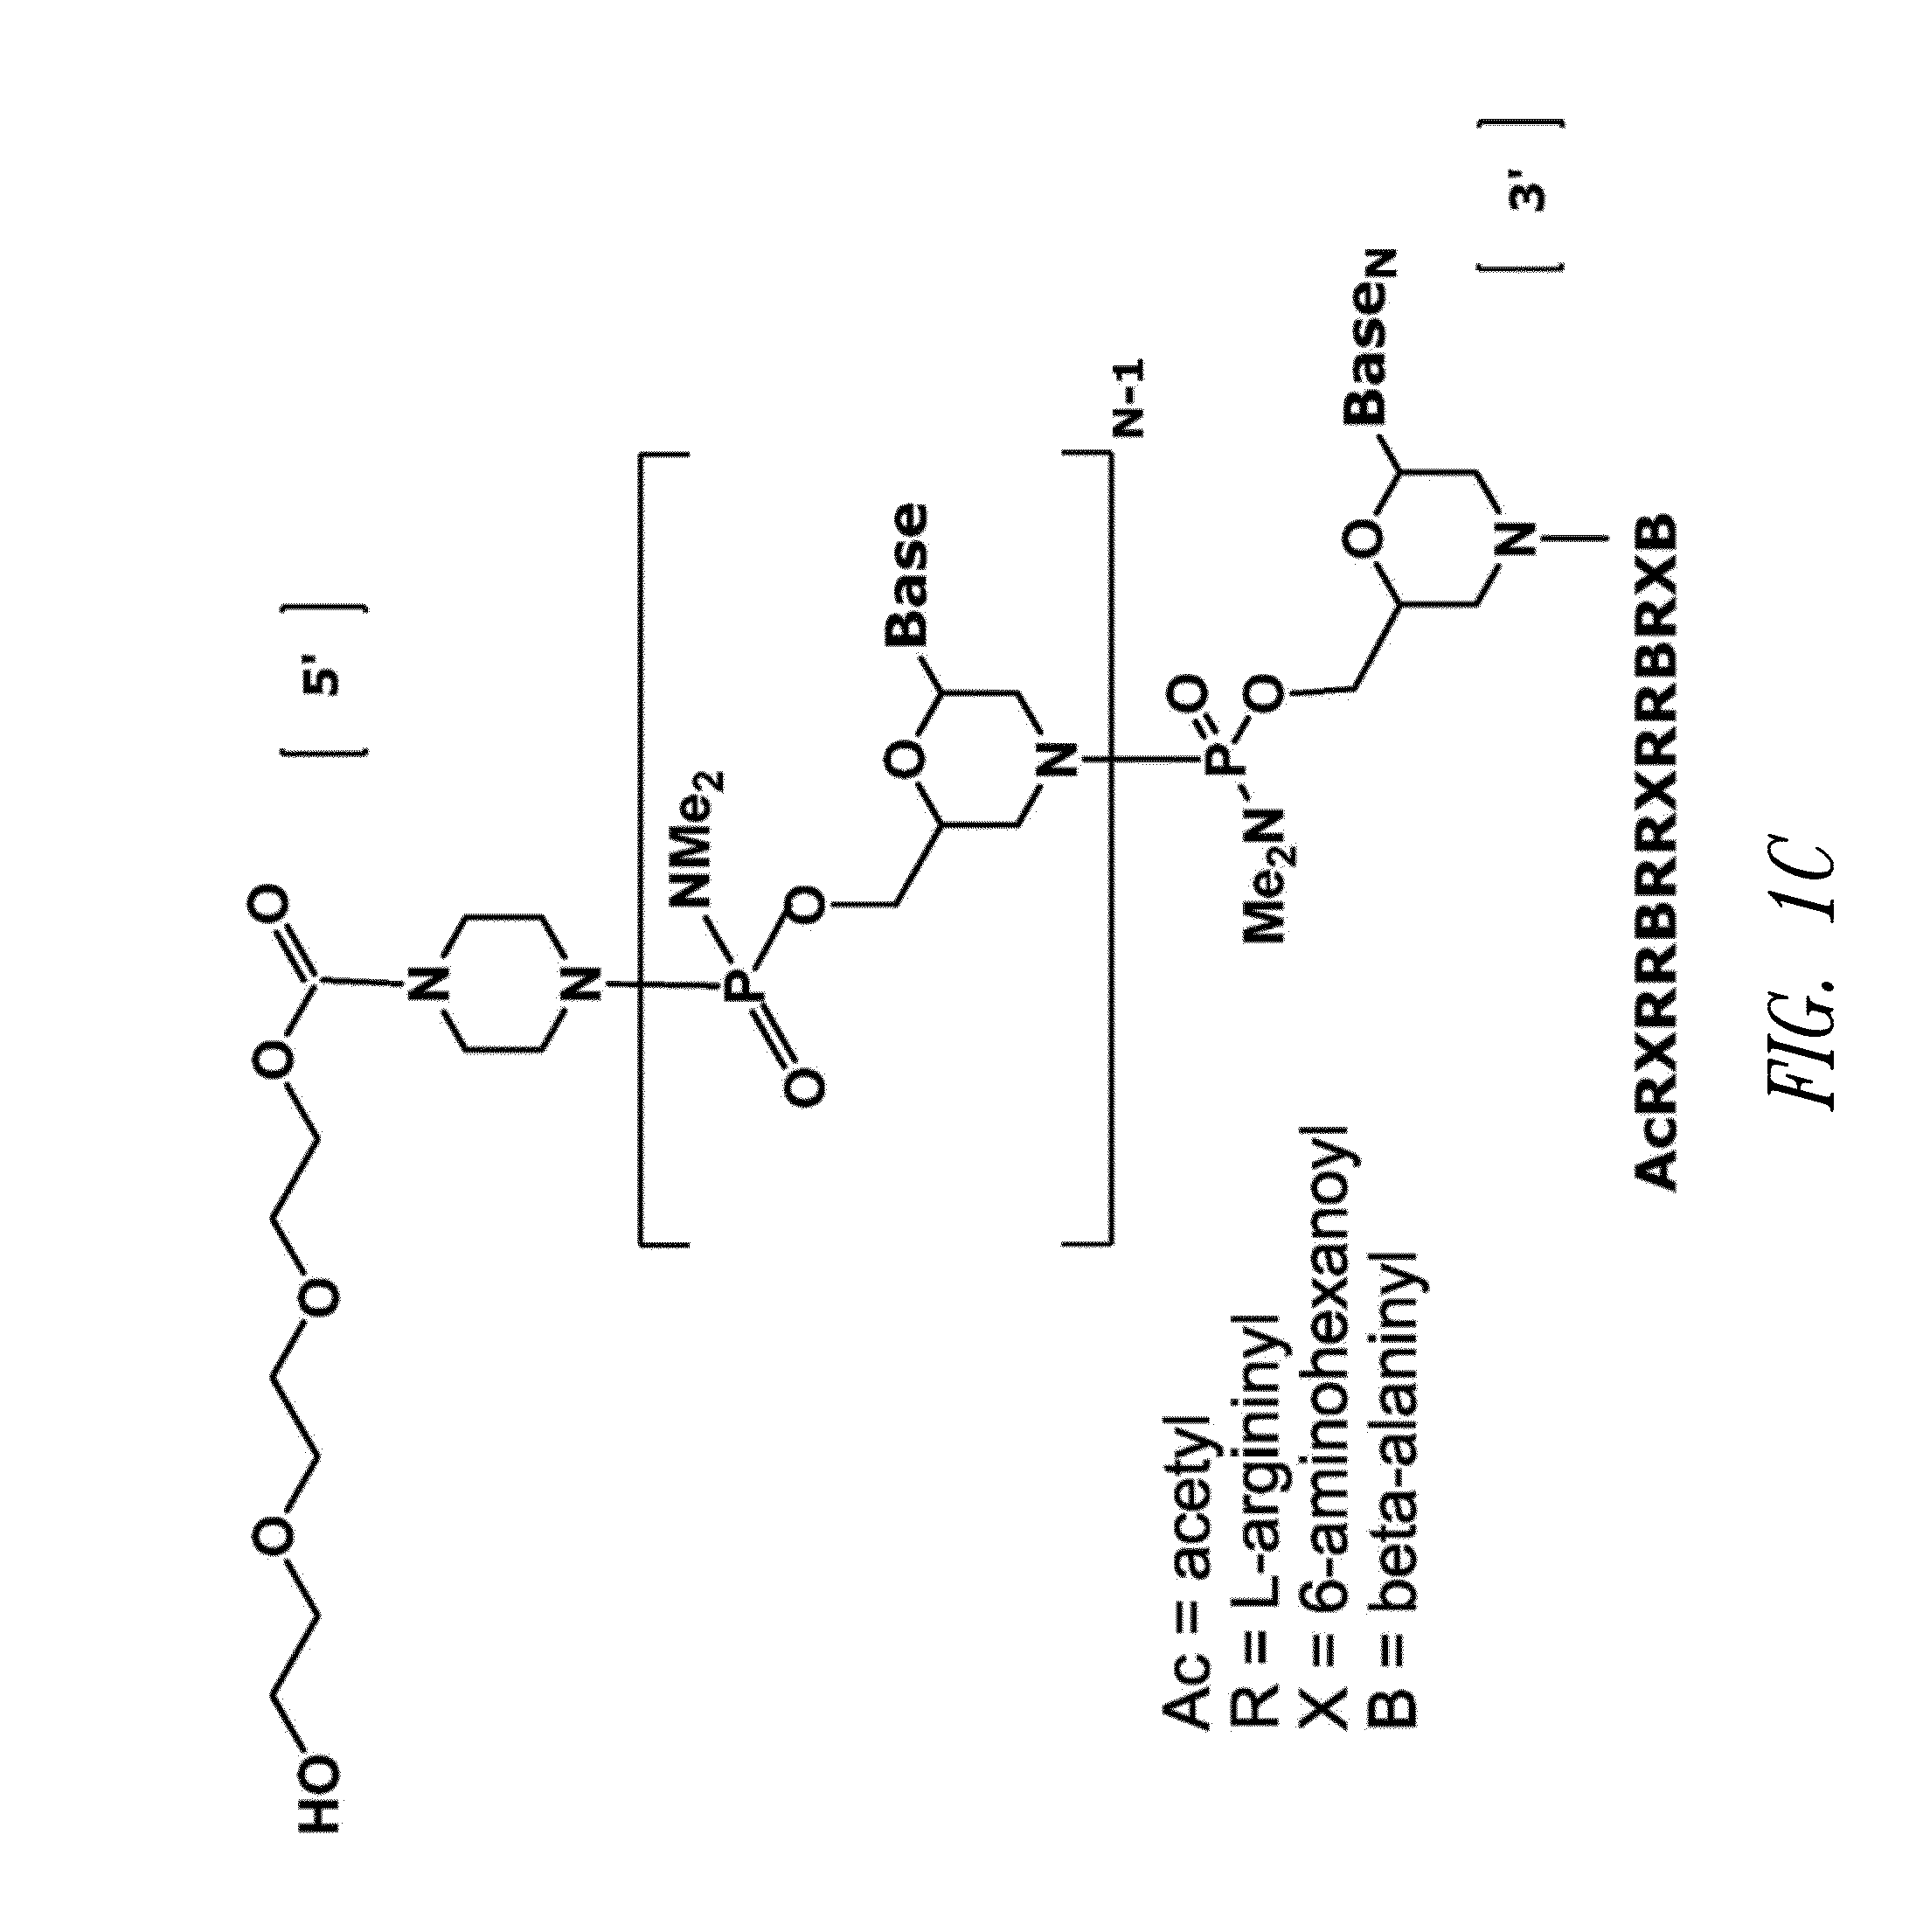 Antisense antiviral compound and method for treating influenza viral infection